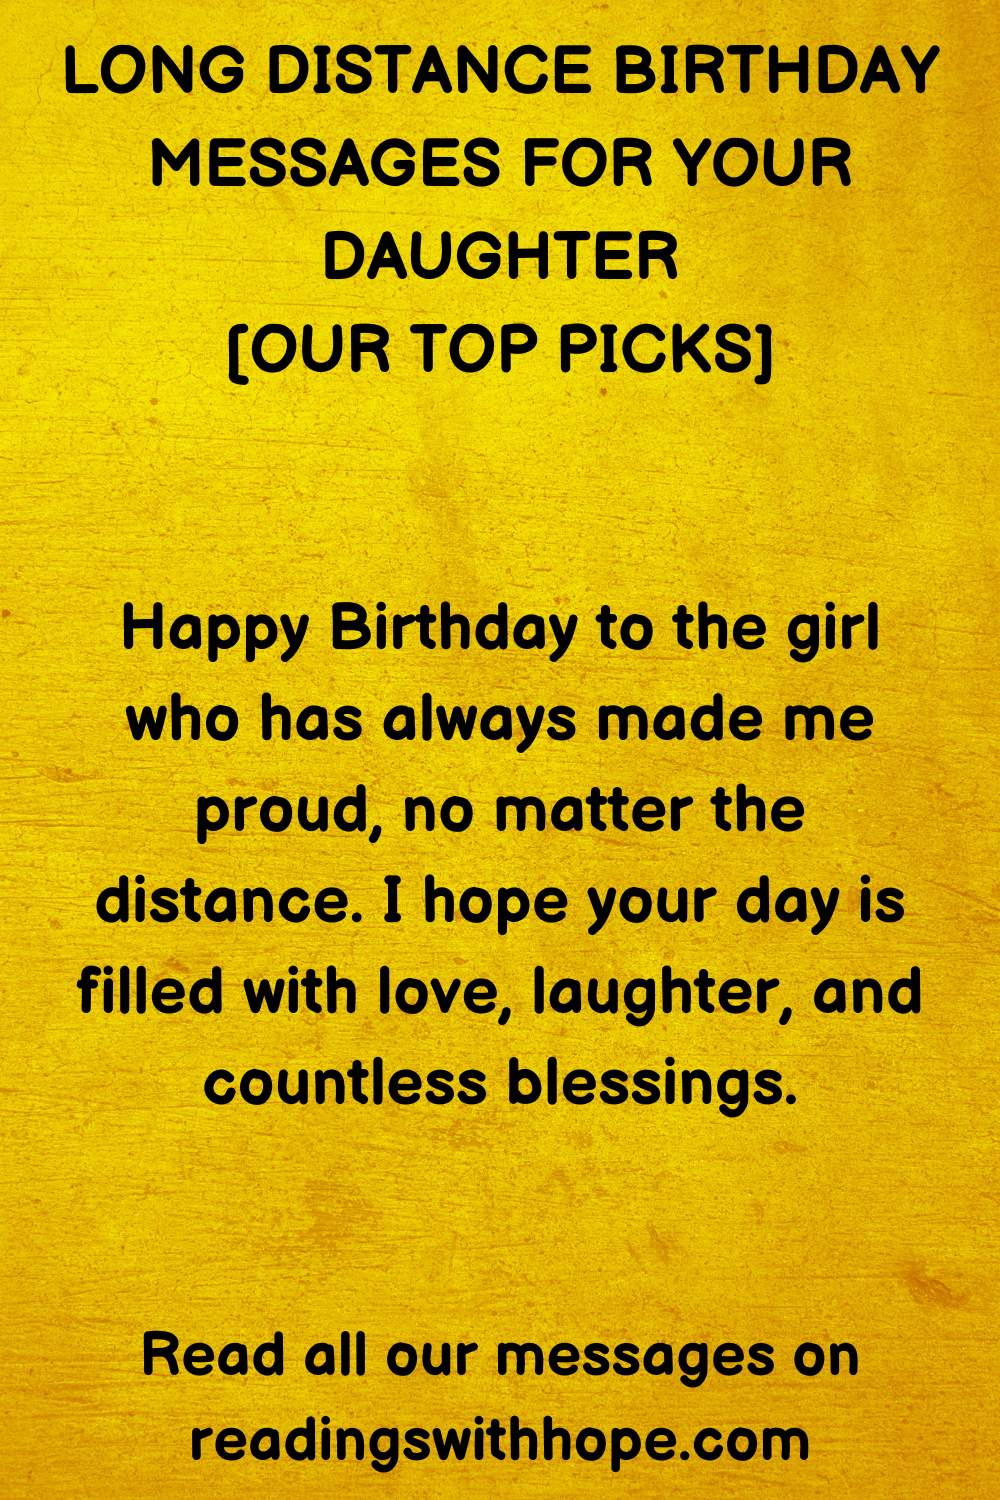 35 Long Distance Birthday Messages For Your Daughter